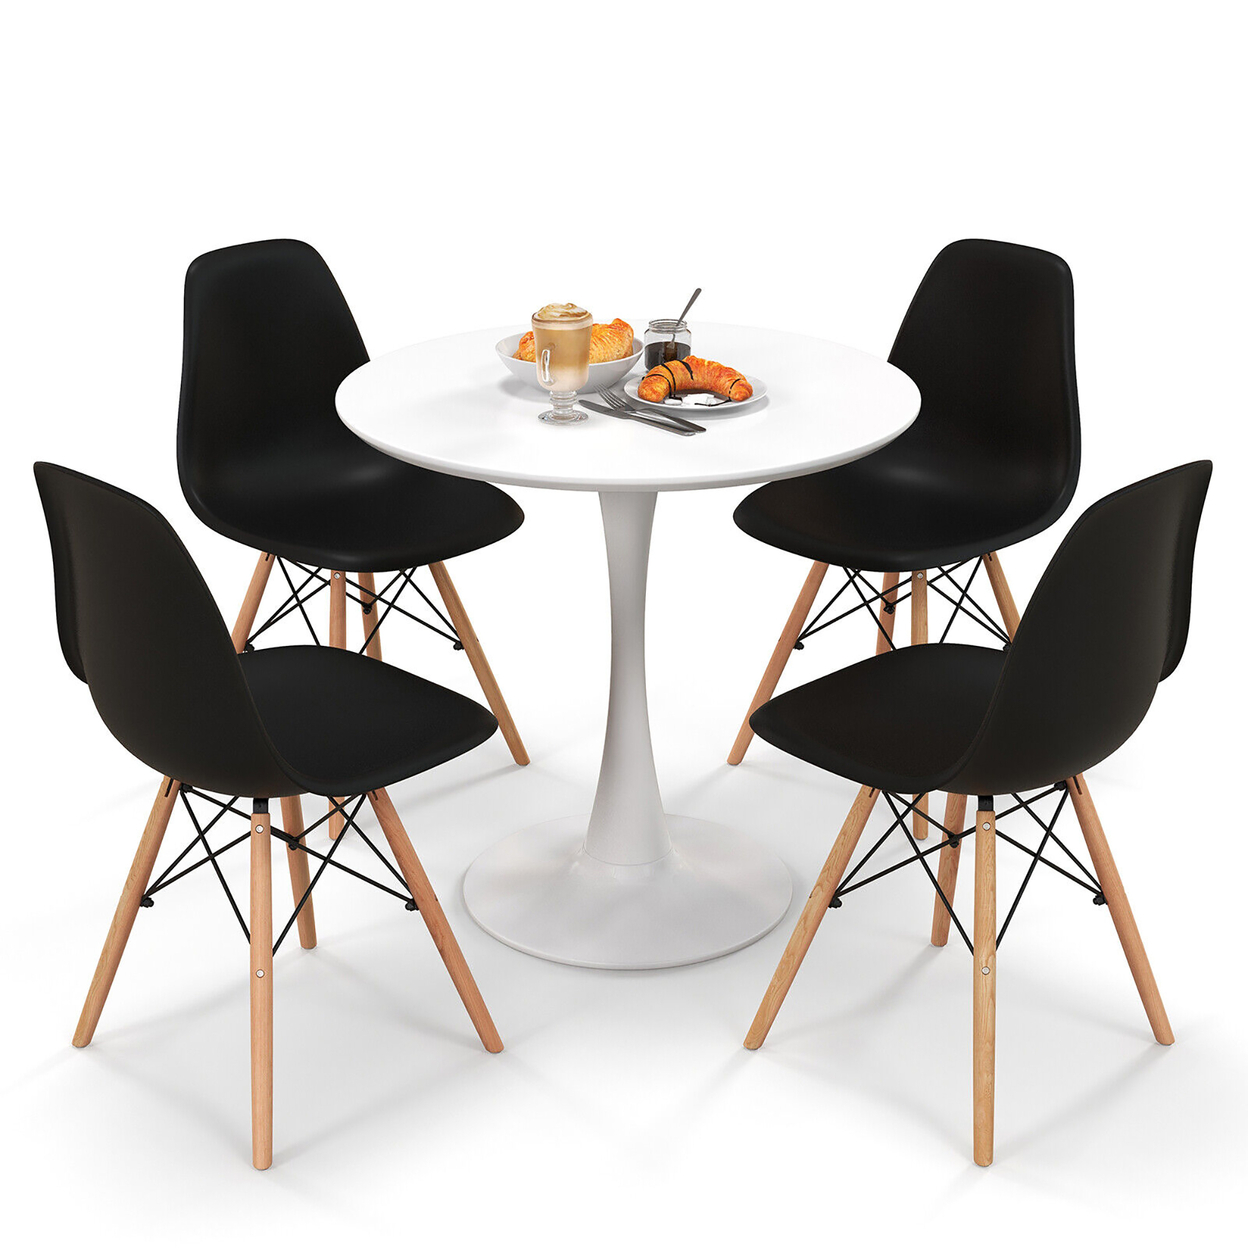 5 PCS Dining Set Modern Round Dining Table 4 Chairs For Small Space Kitchen